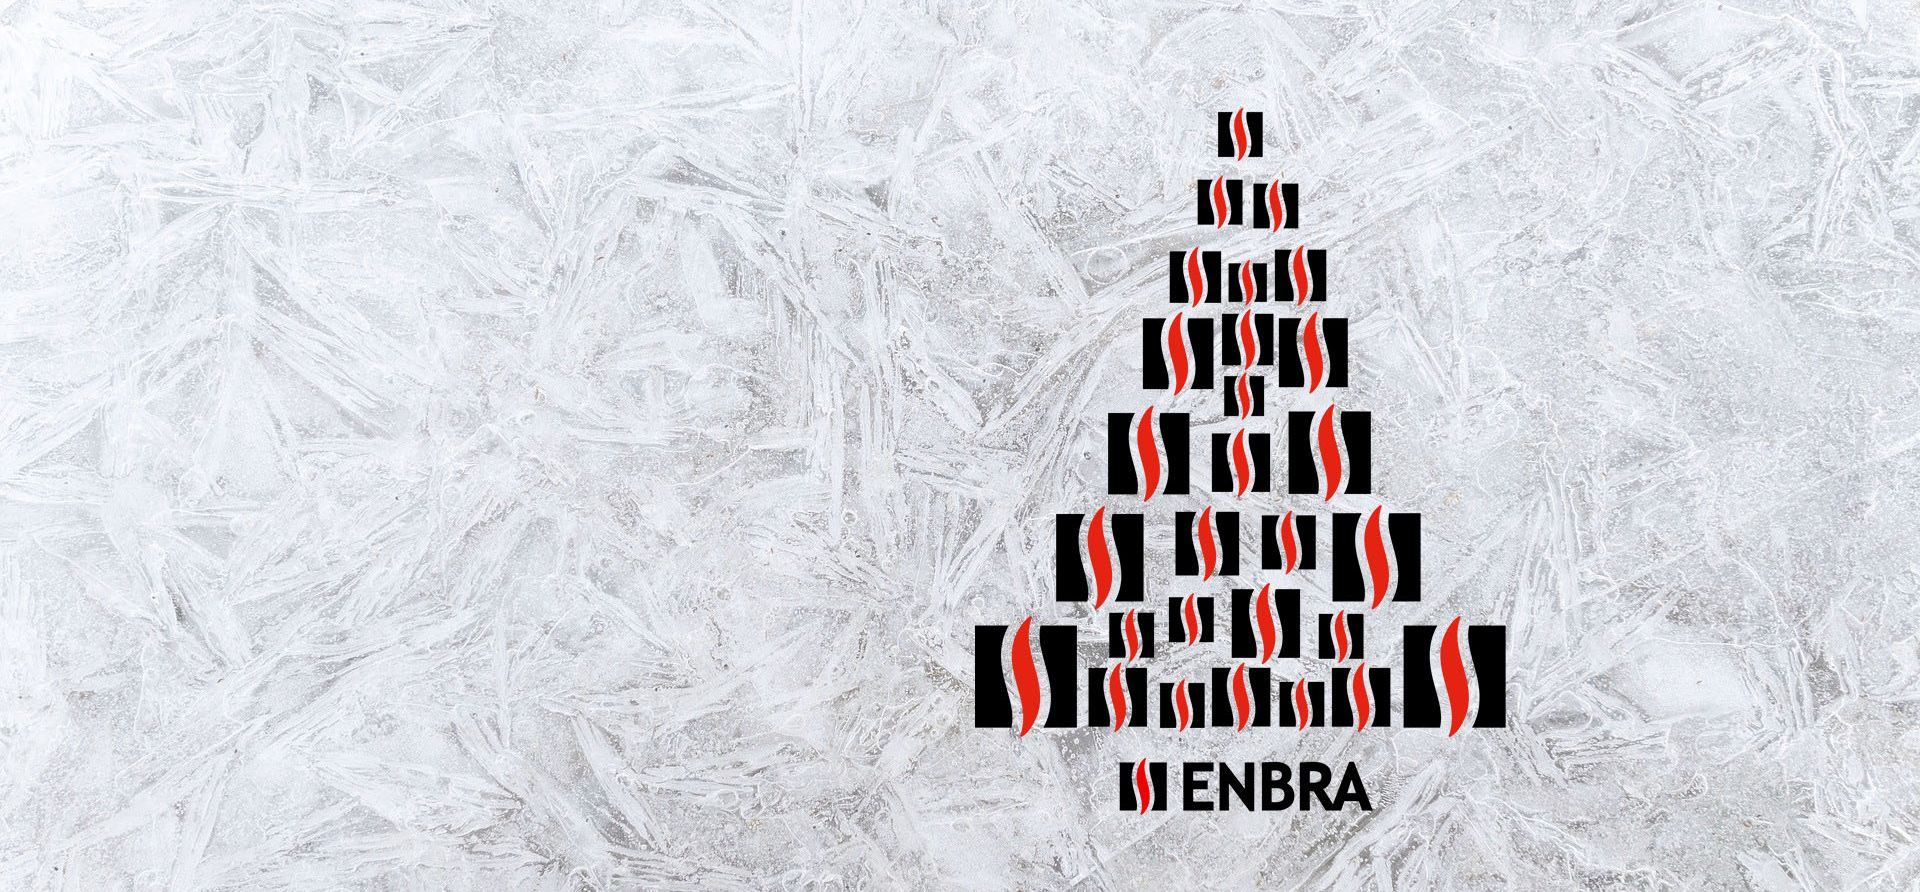 ENBRA wishes you a merry Christmas